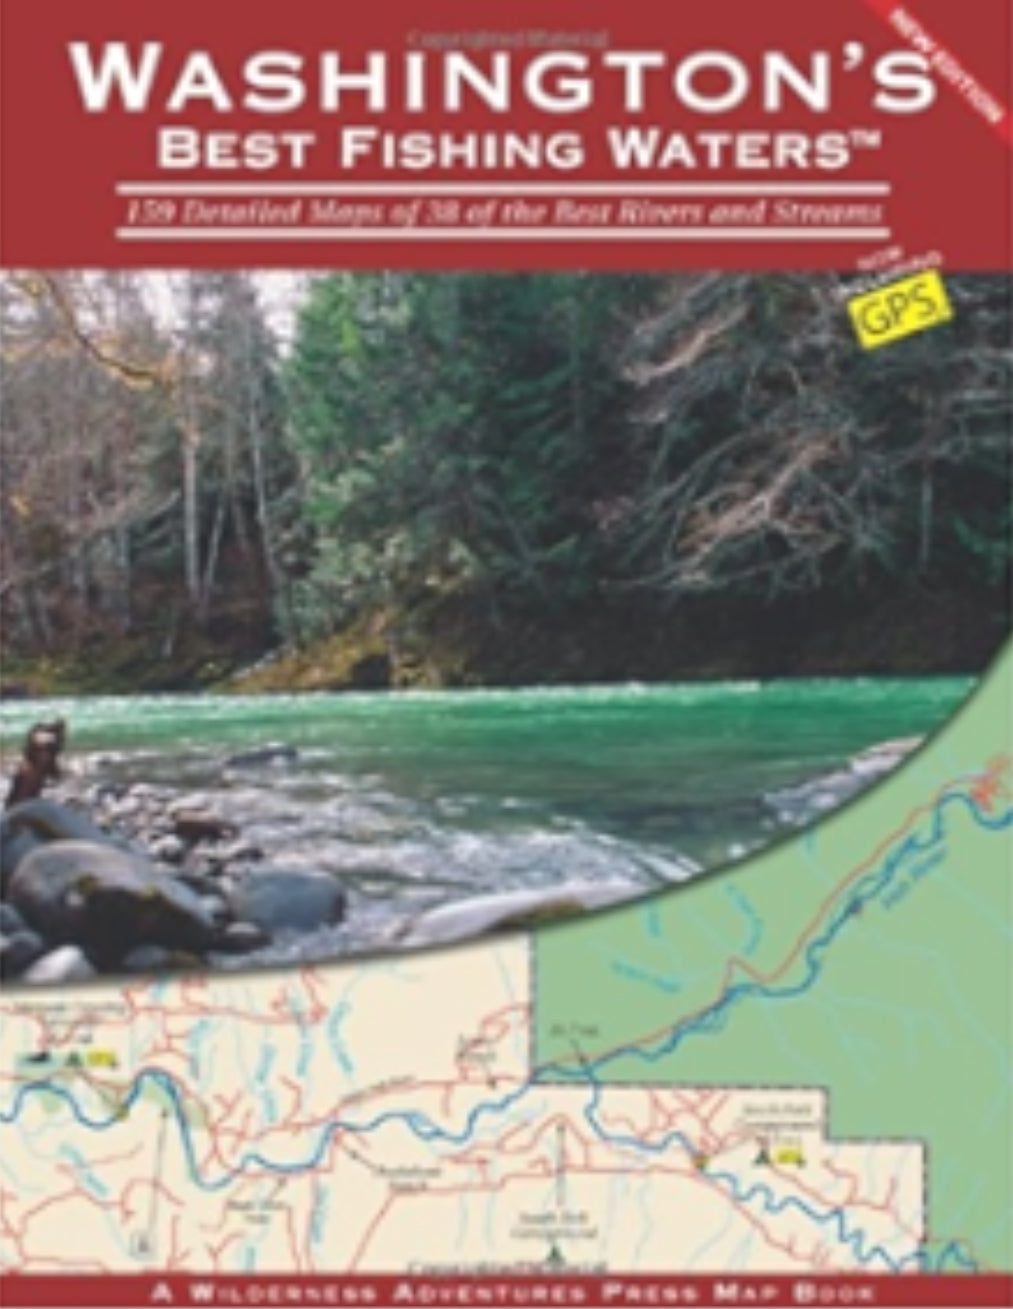 Angler's Book Supply Washington's Best Fishing Waters Book - North 40 Outfitters